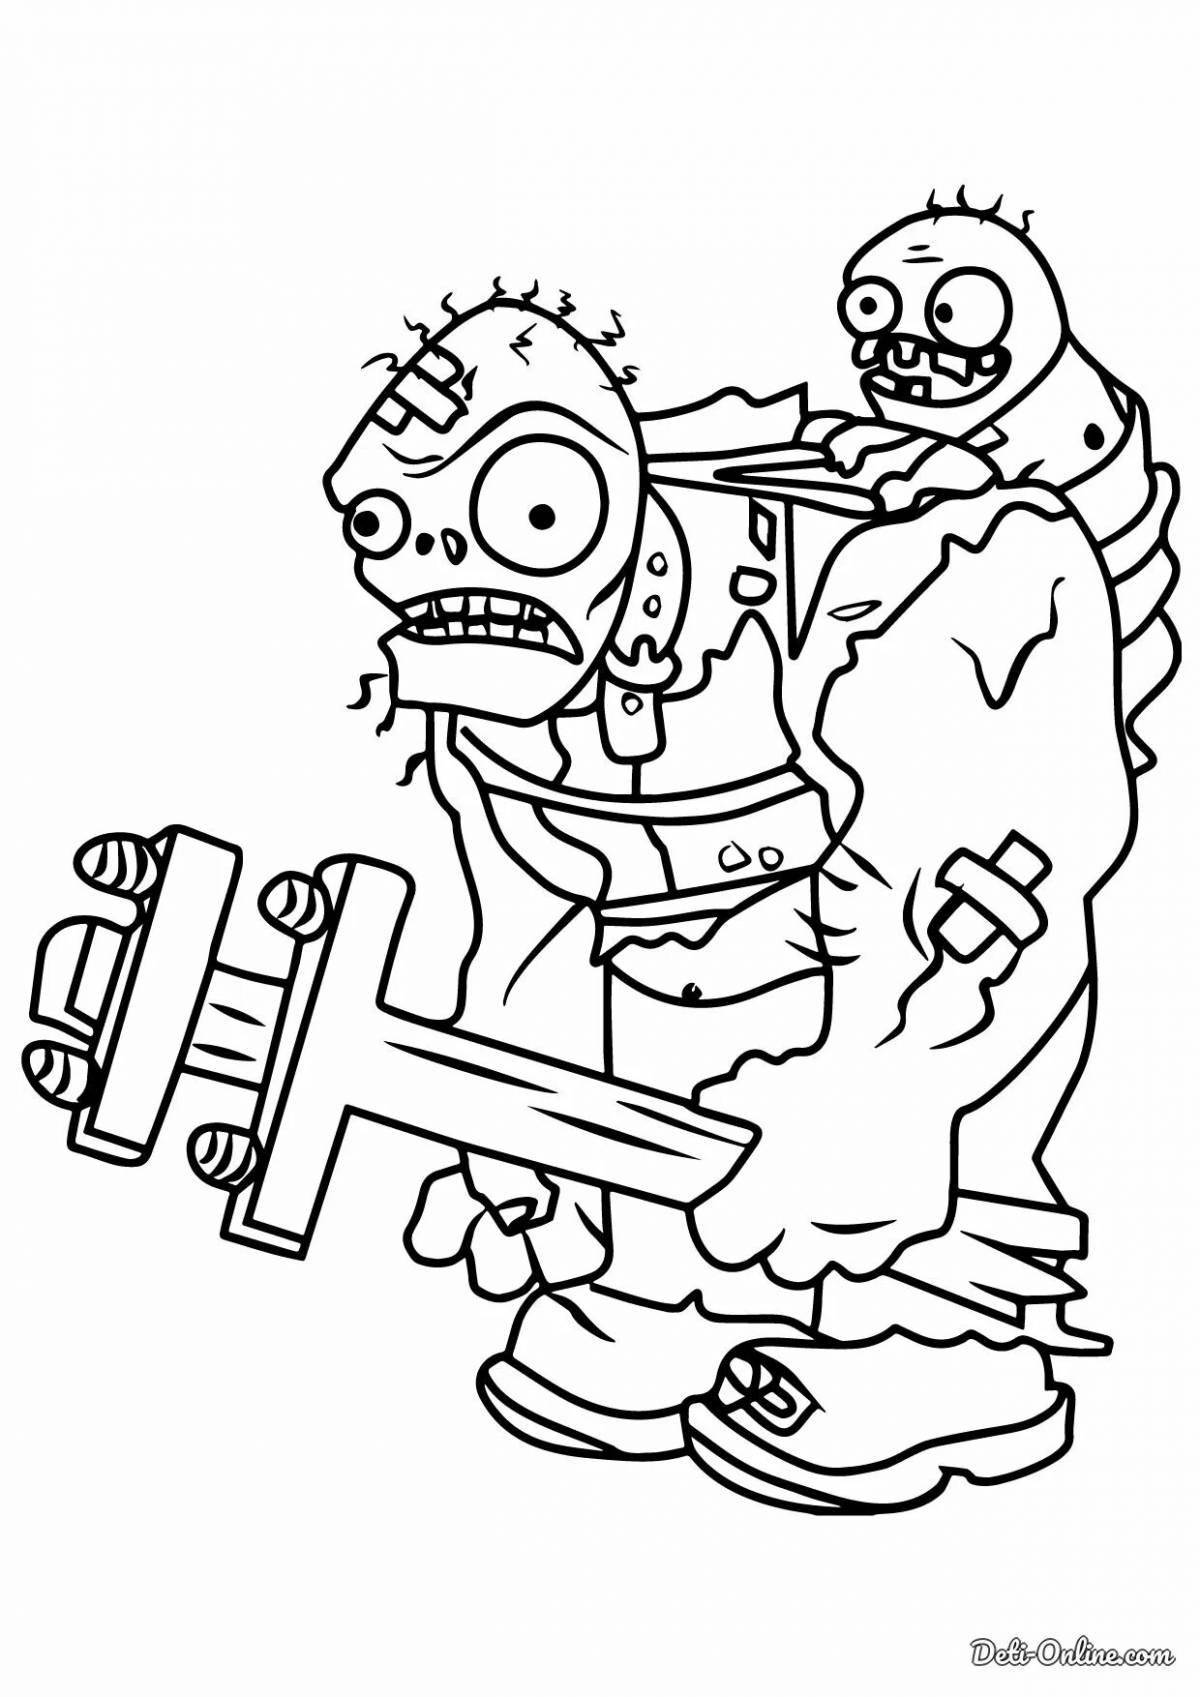 Colorful zombie catcher coloring page